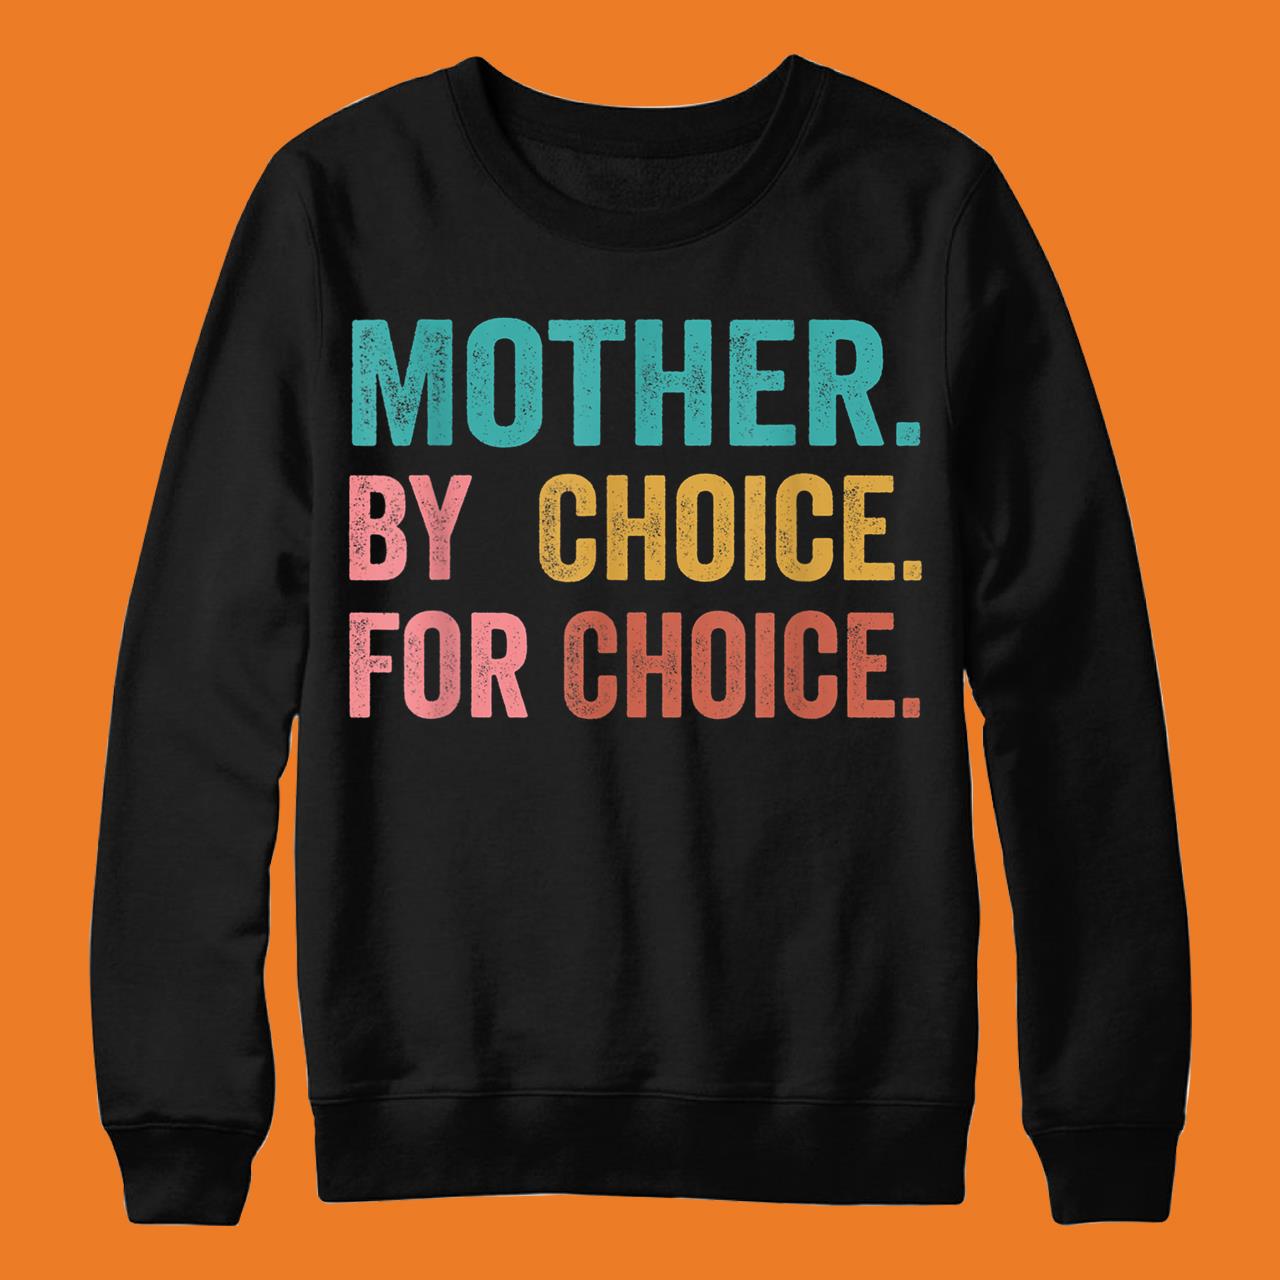 Mother By Choice For Choice Pro Choice Feminist Women Rights T-Shirt